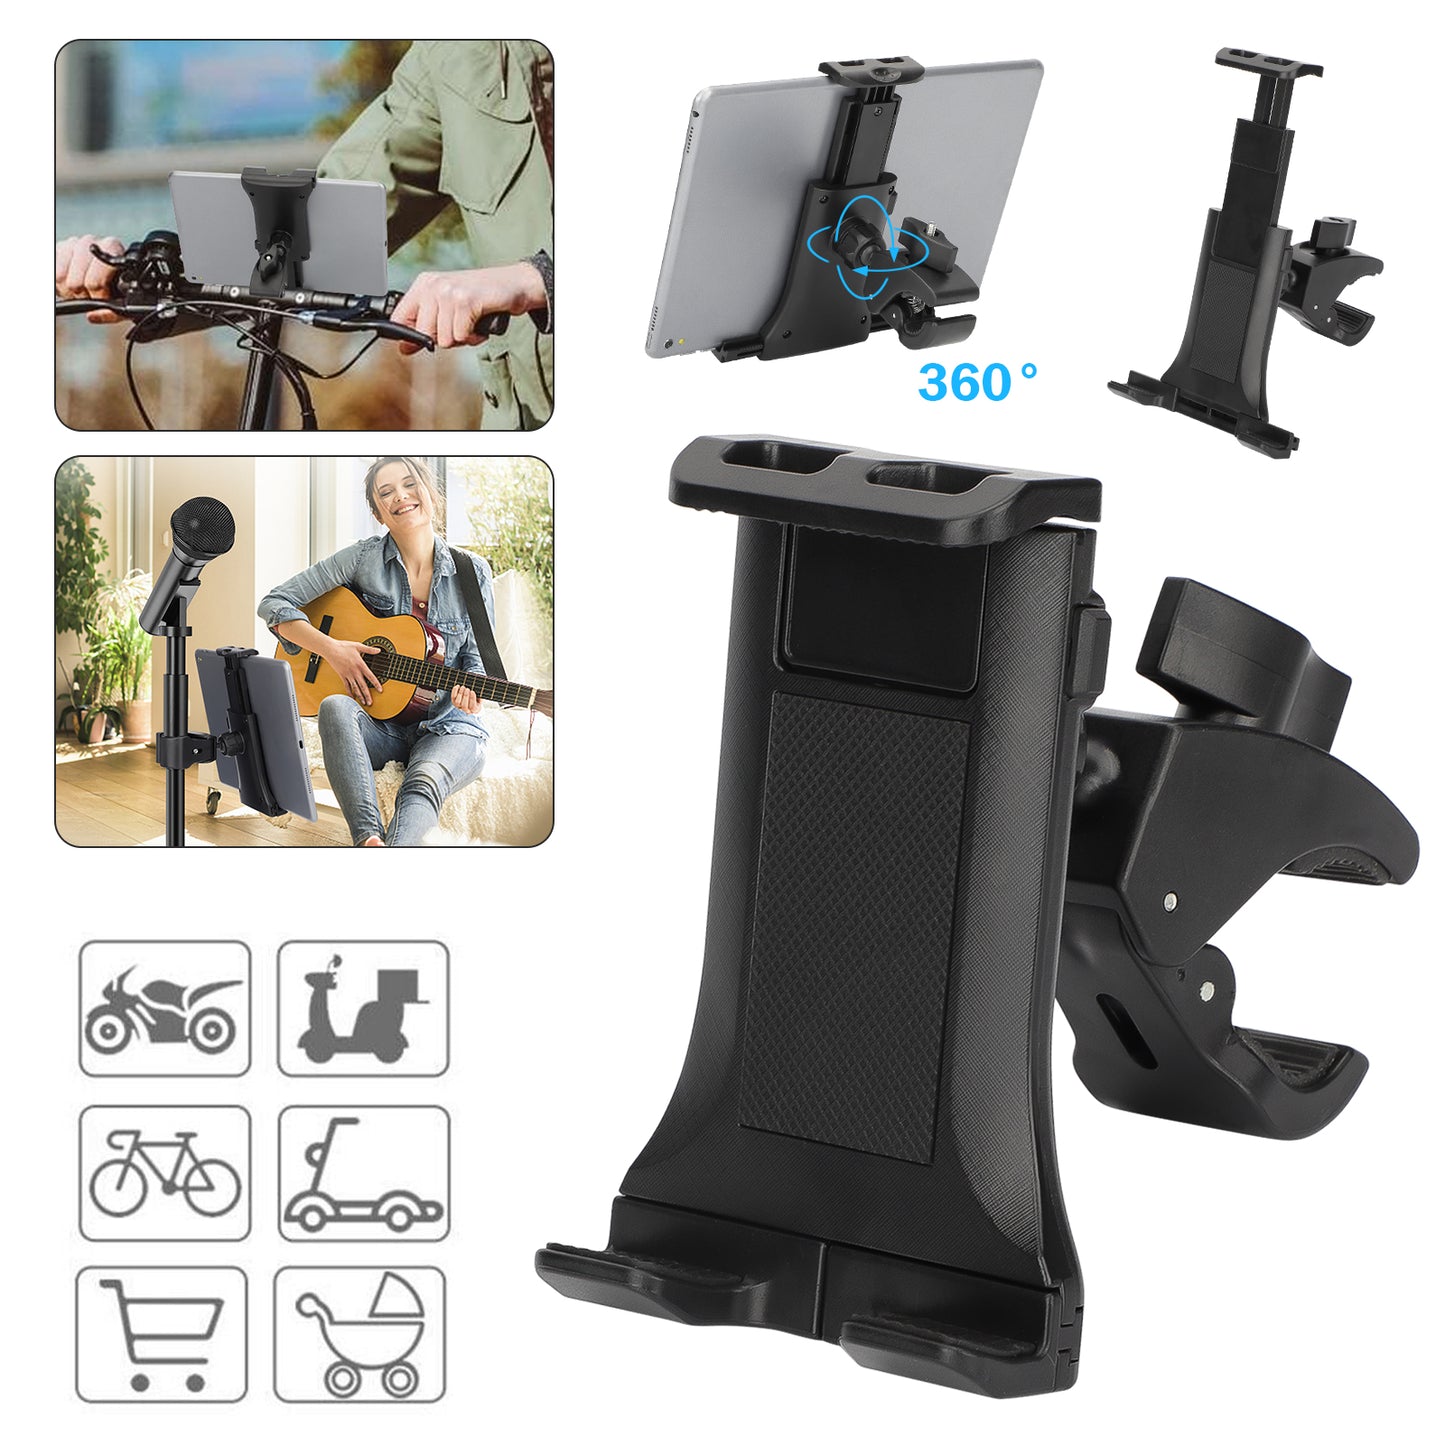 Music Microphone Tablet Holder - Music Microphone Stand Holder Mount Fit For 7-11" Tablet iPad 4 3 2 Samsung Tab